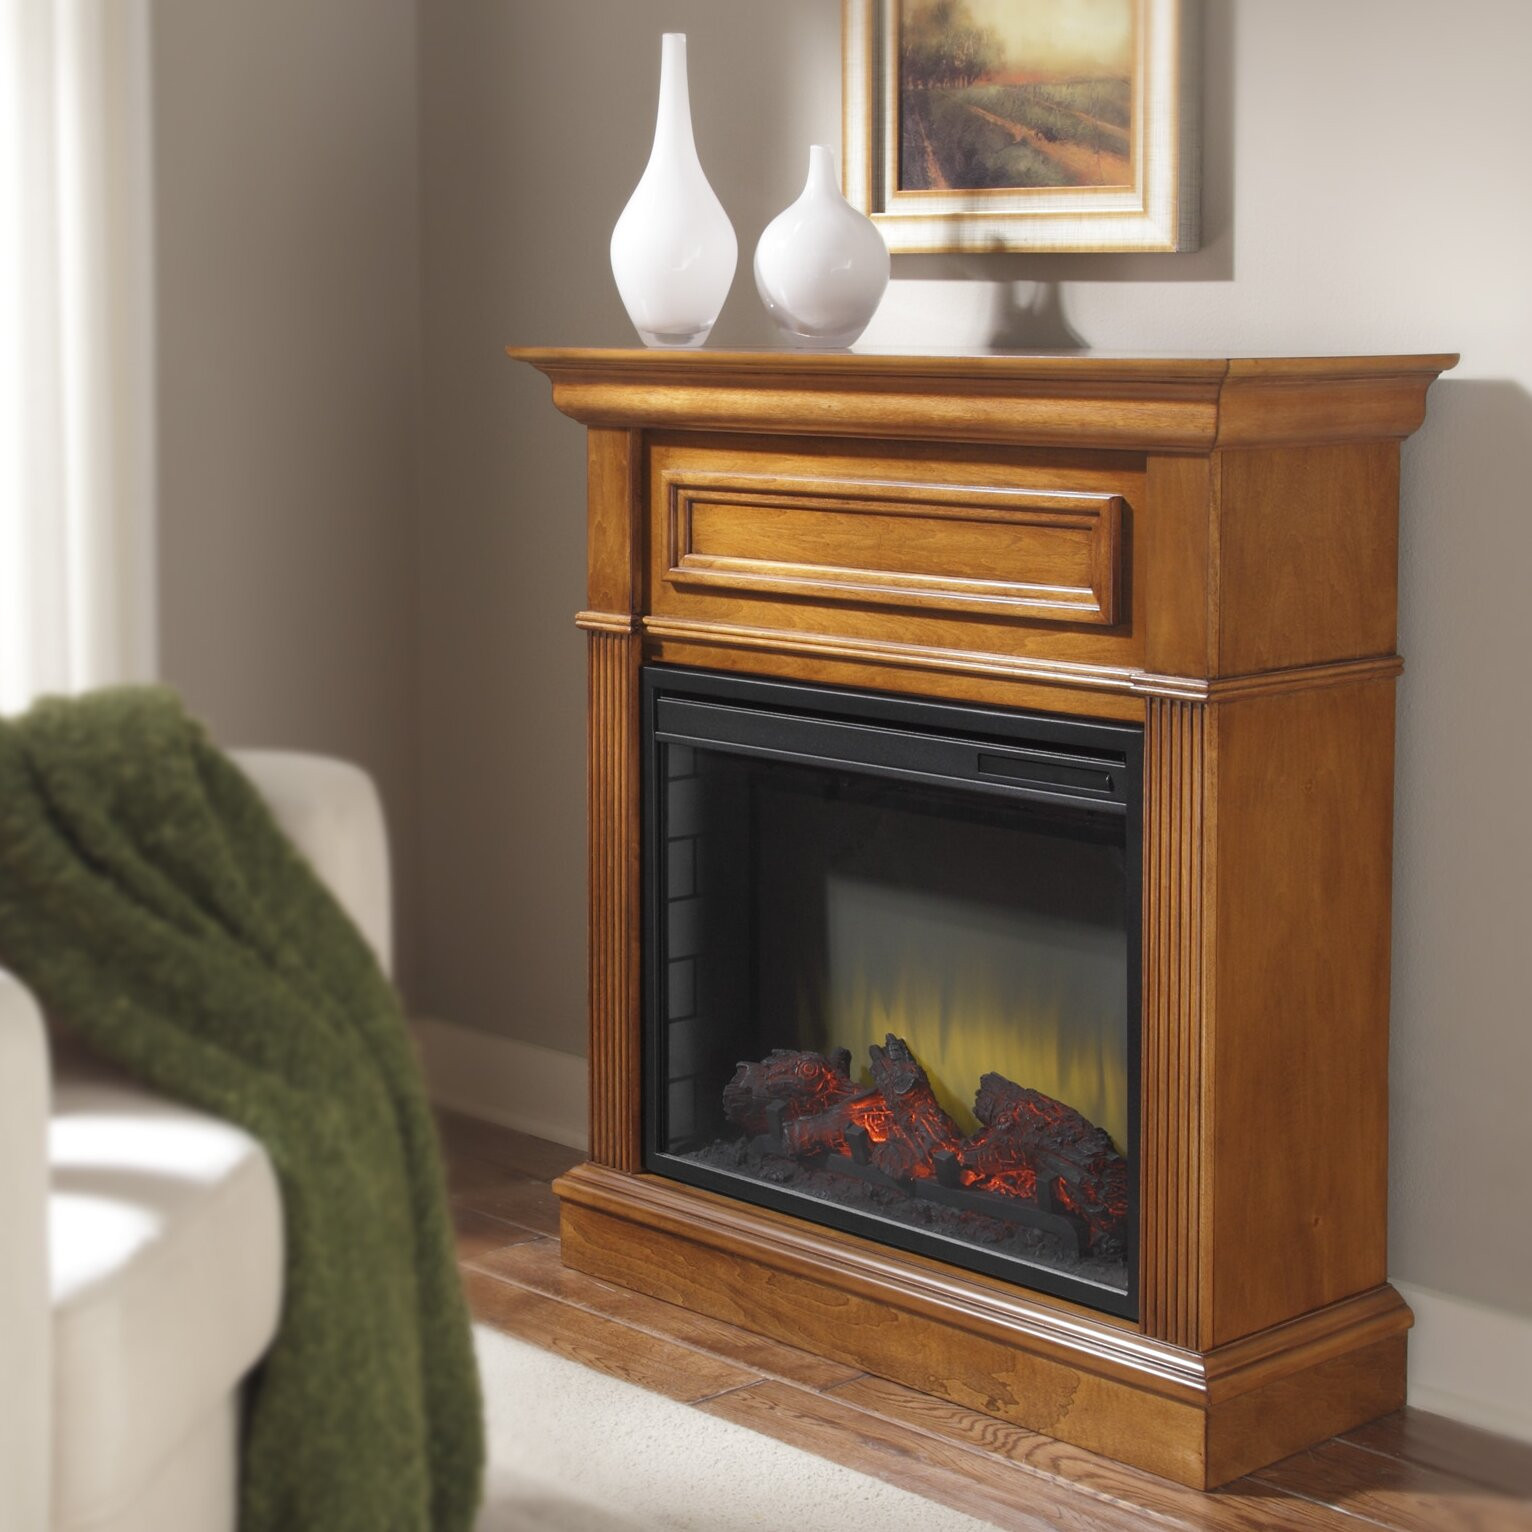 Pleasant Hearth Electric Fireplace
 Pleasant Hearth Hawthorne pact Electric Fireplace